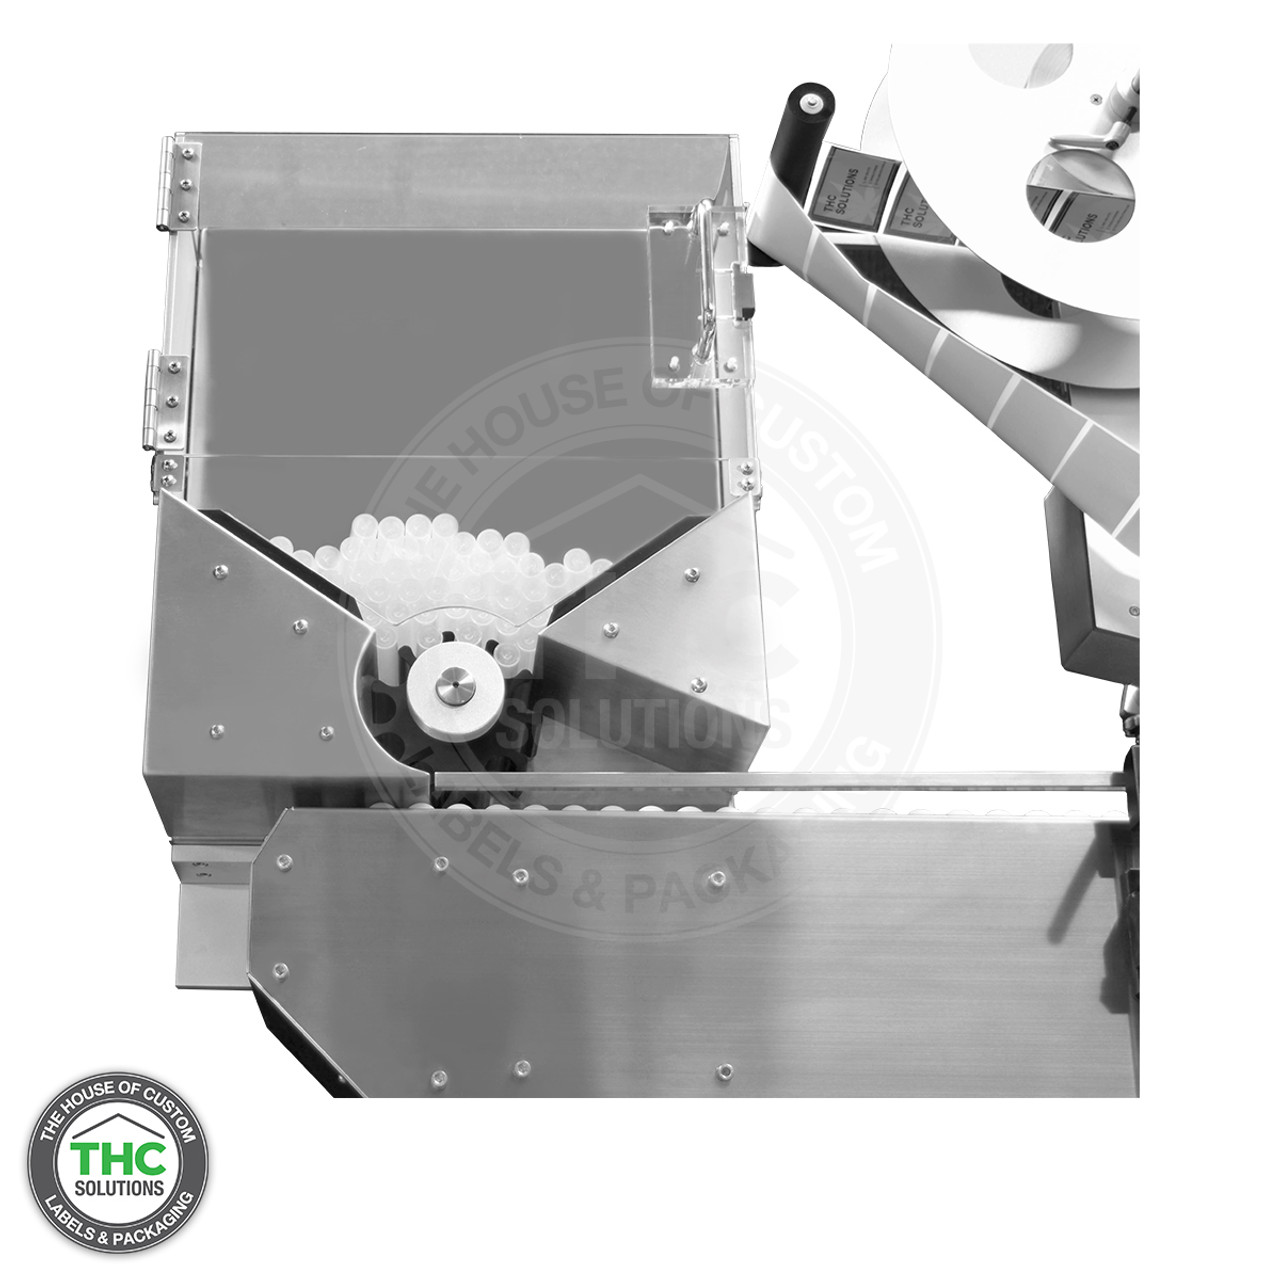 THC Tapper Pro Label Applicator (Air Compressor required)